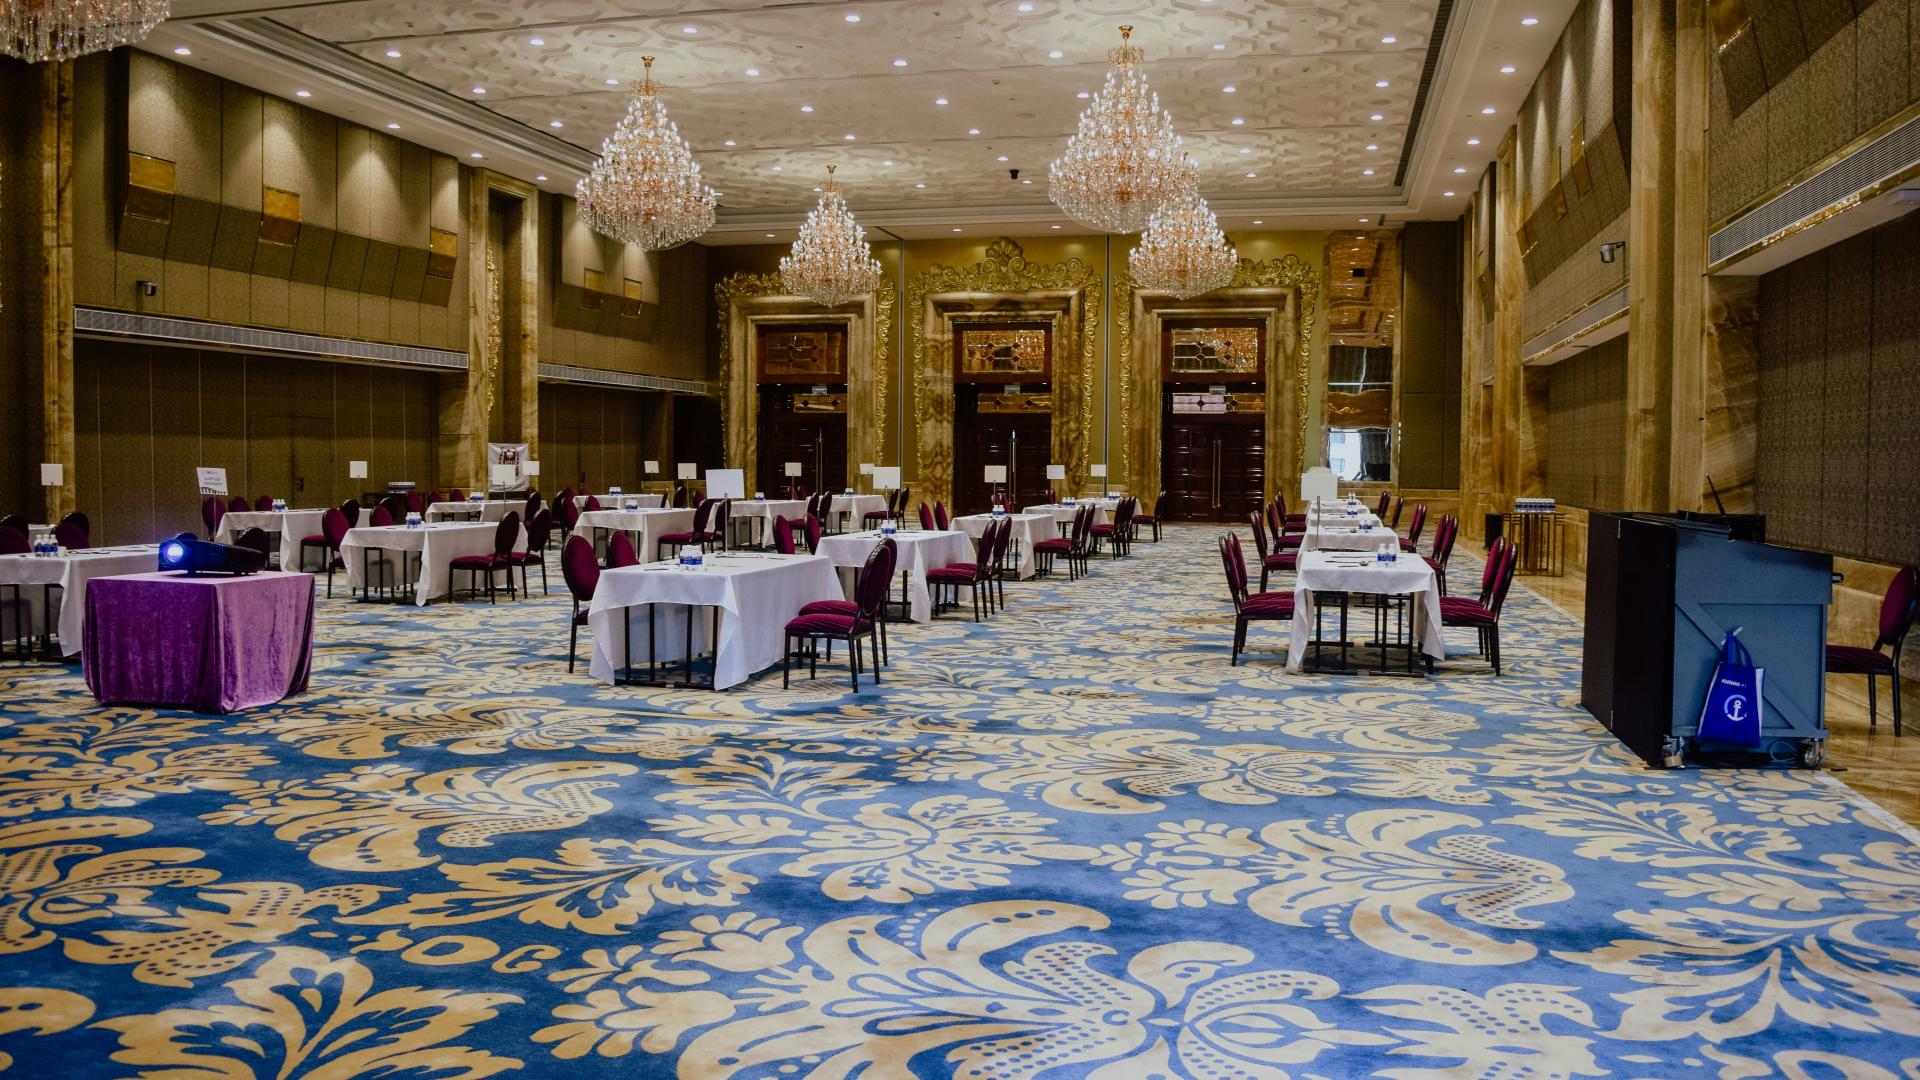 Function Halls for Hire in London